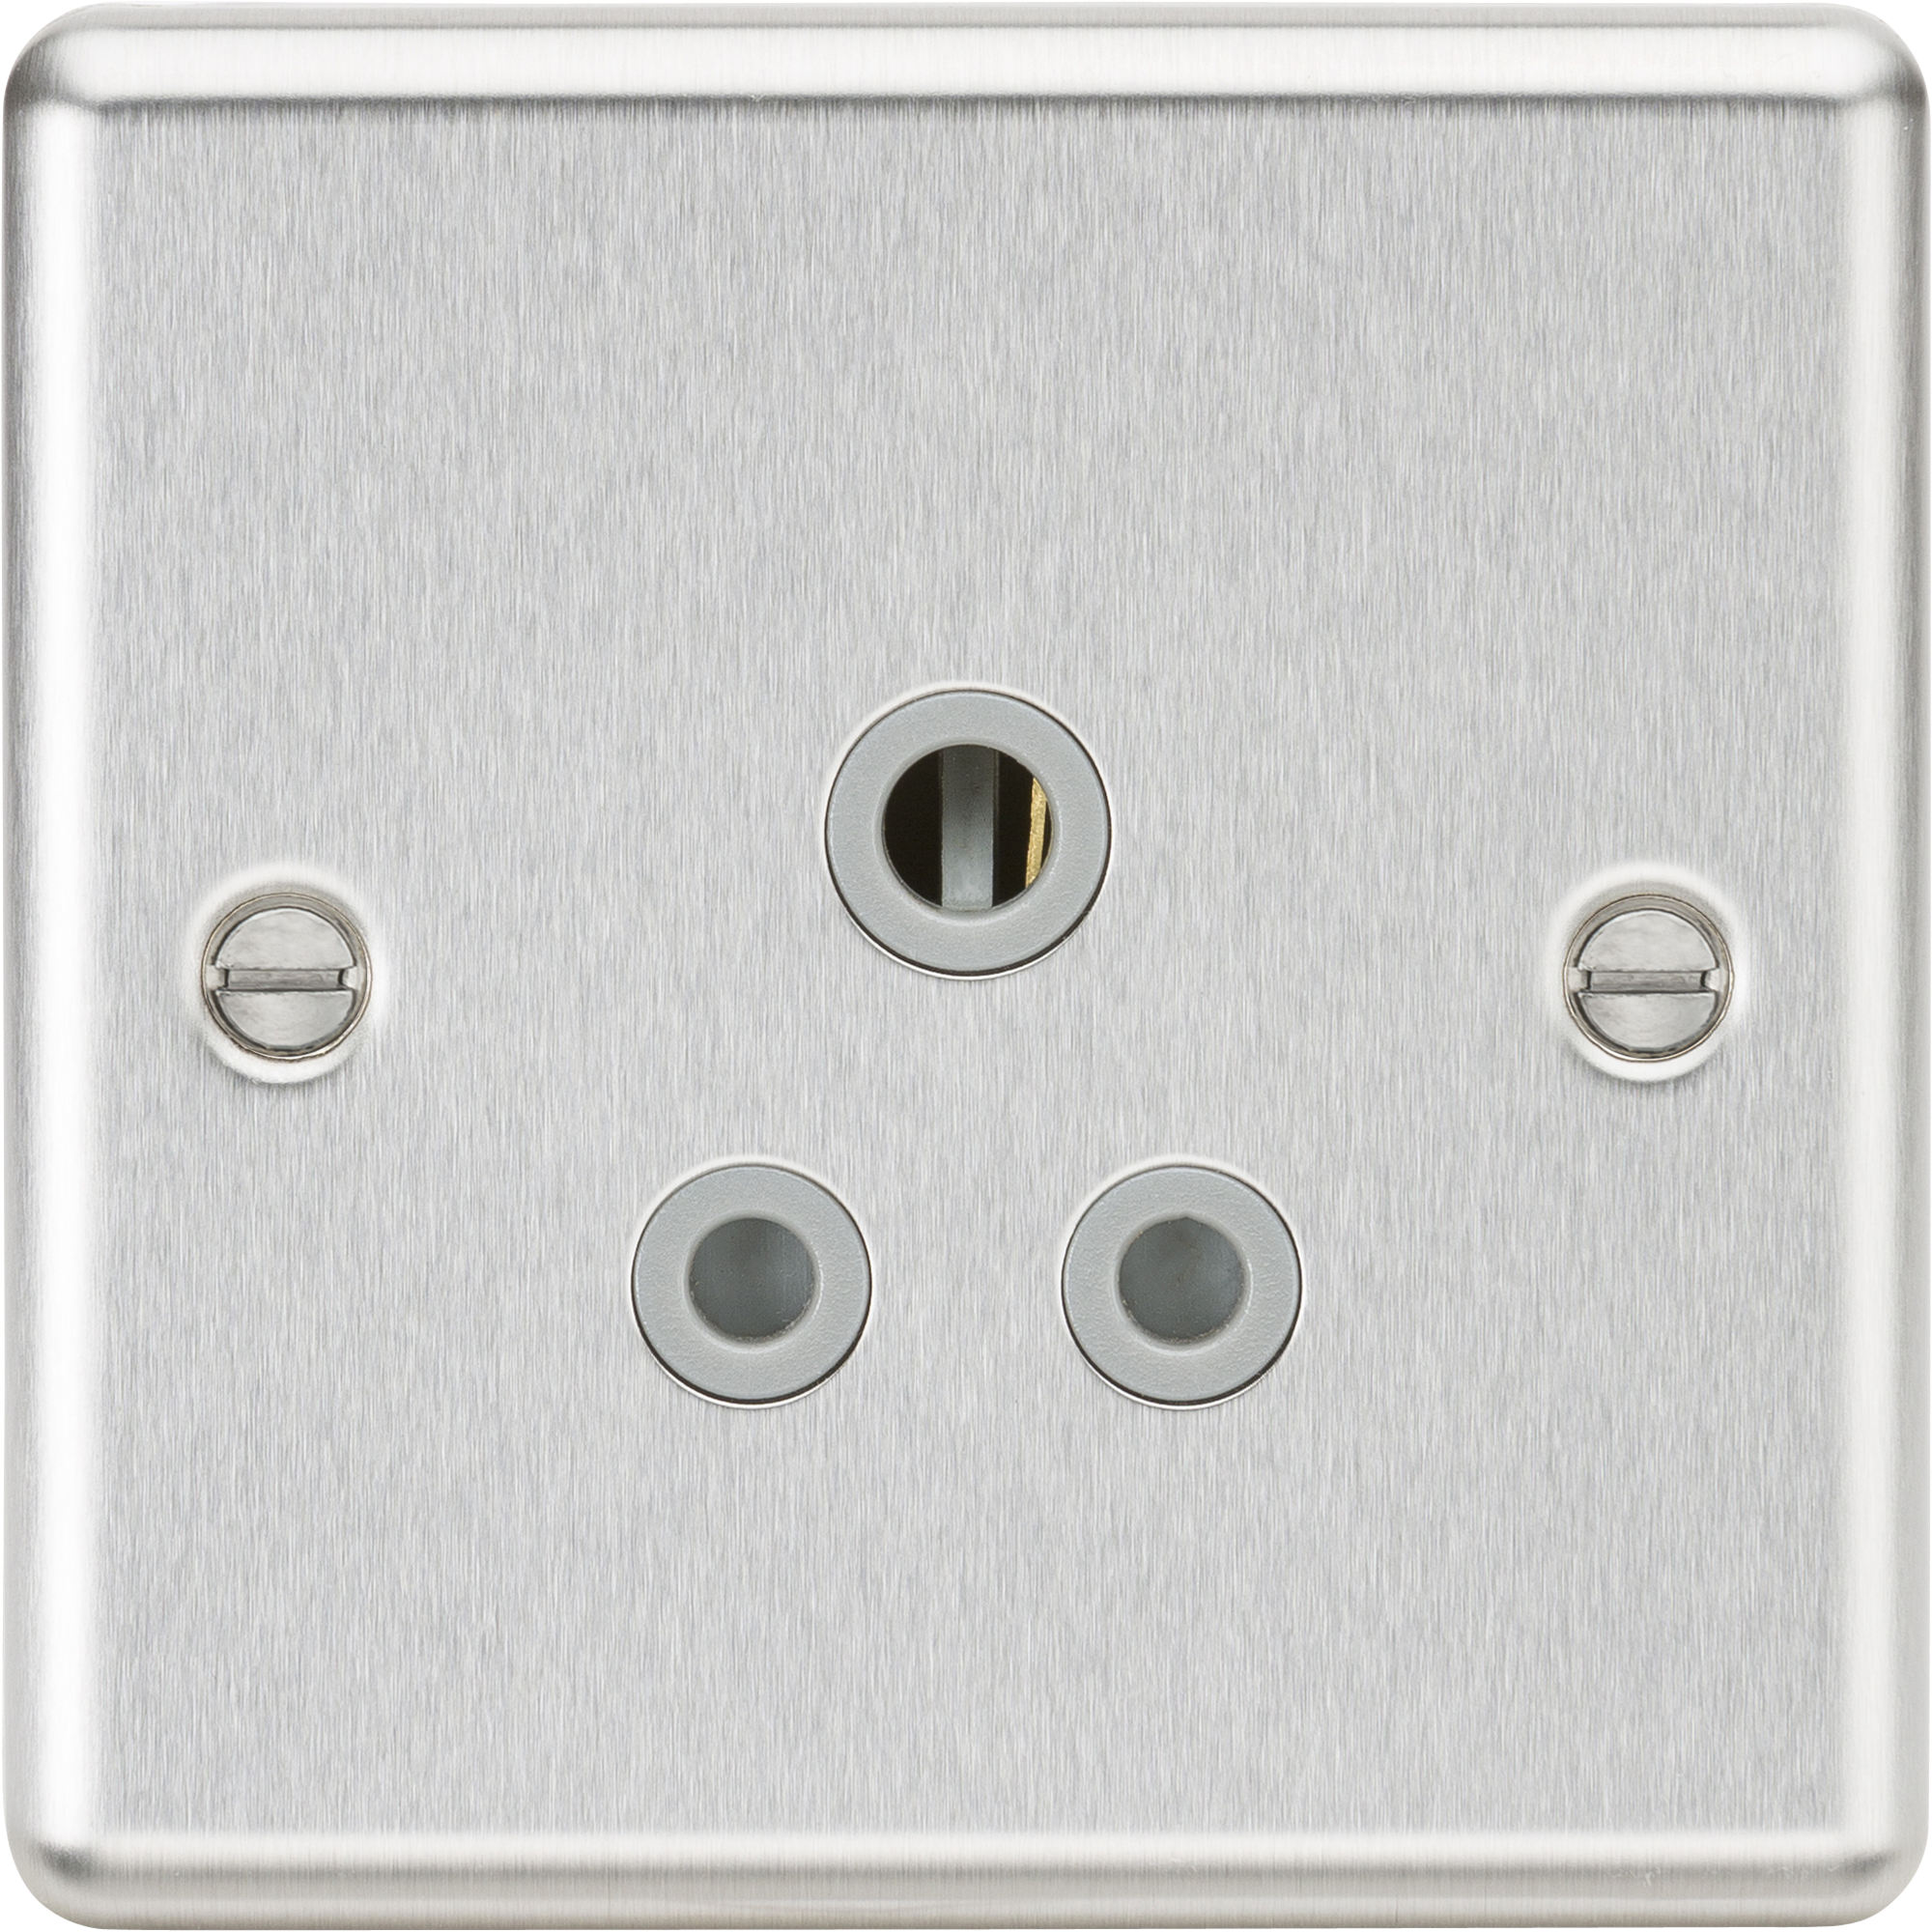 5A Unswitched Socket - Rounded Edge Brushed Chrome Finish With Grey Insert - CL5ABCG 